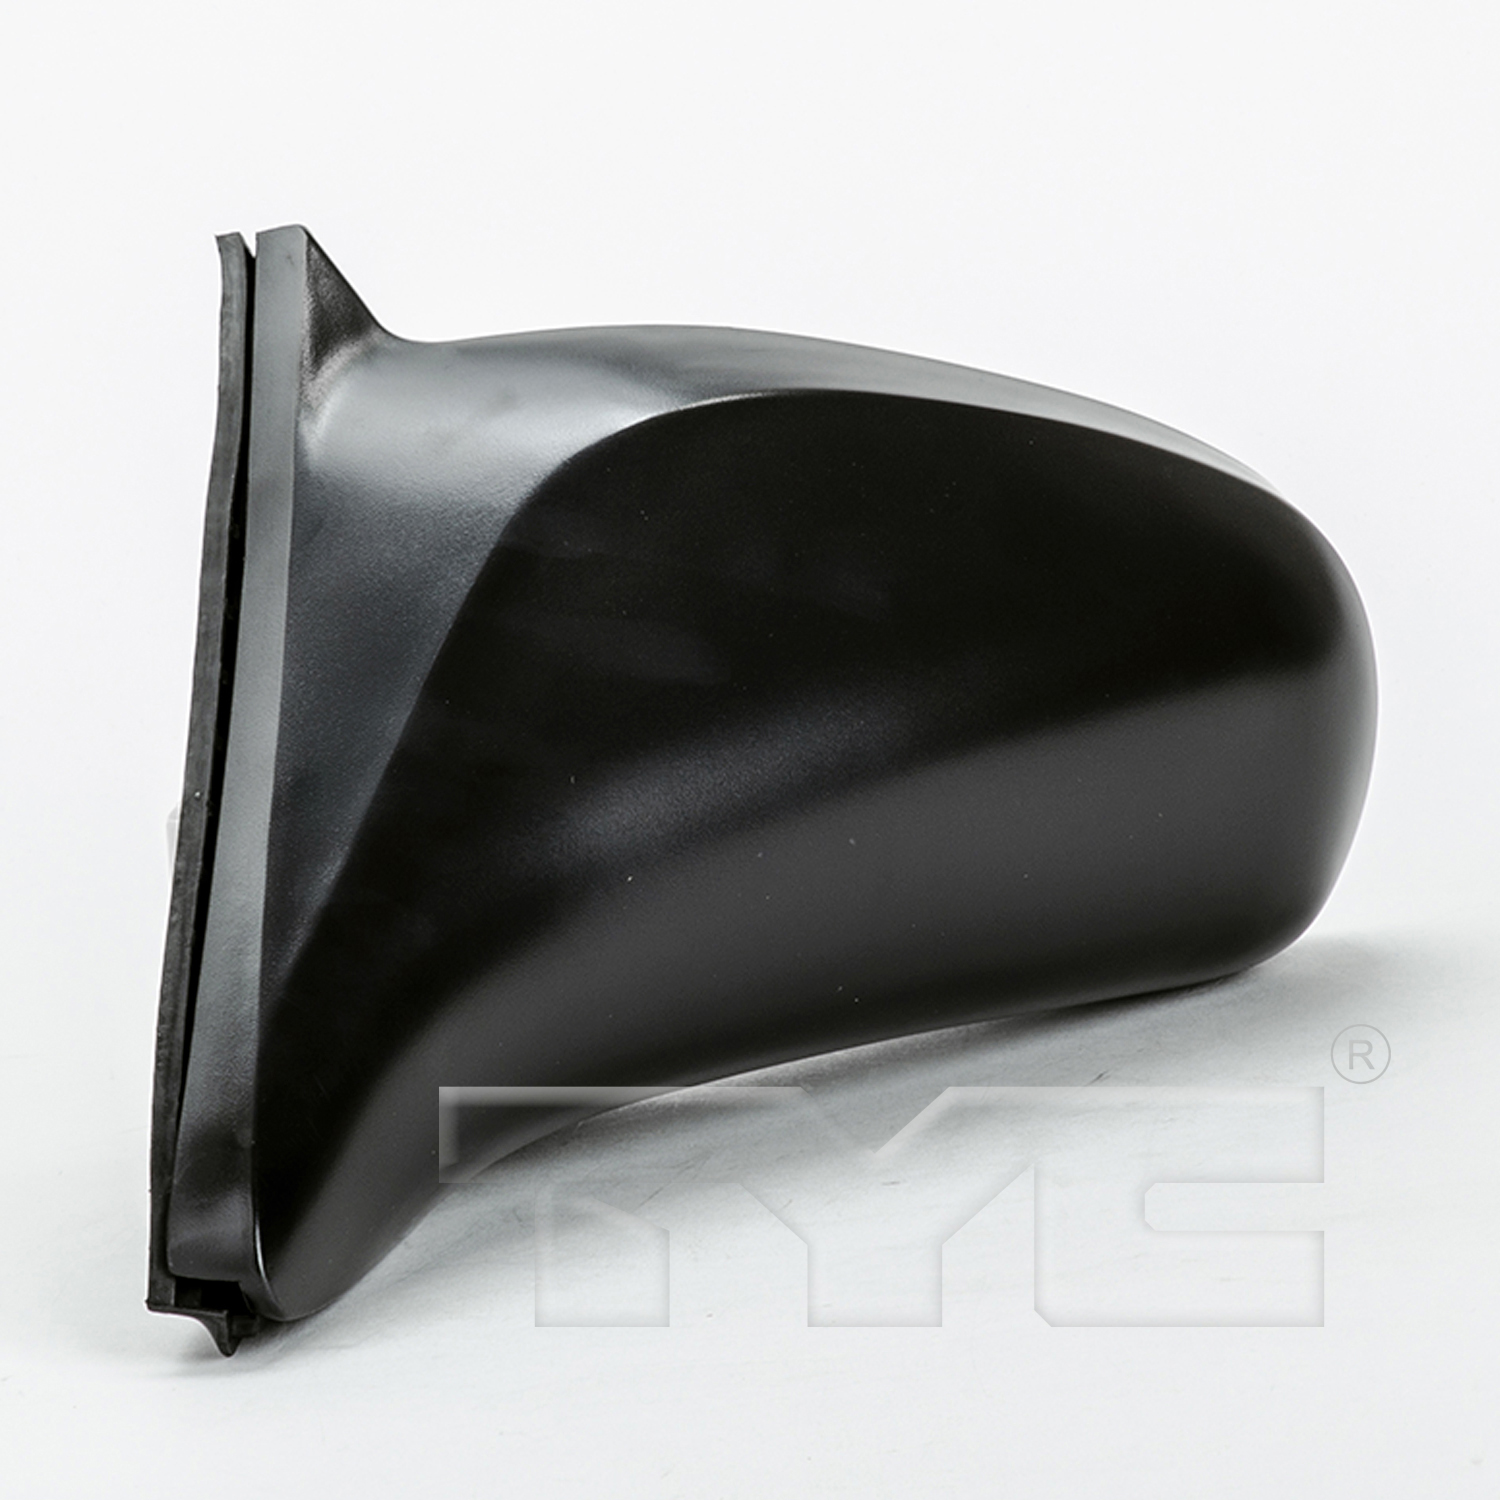 Aftermarket MIRRORS for HONDA - CIVIC, CIVIC,96-00,LT Mirror outside rear view